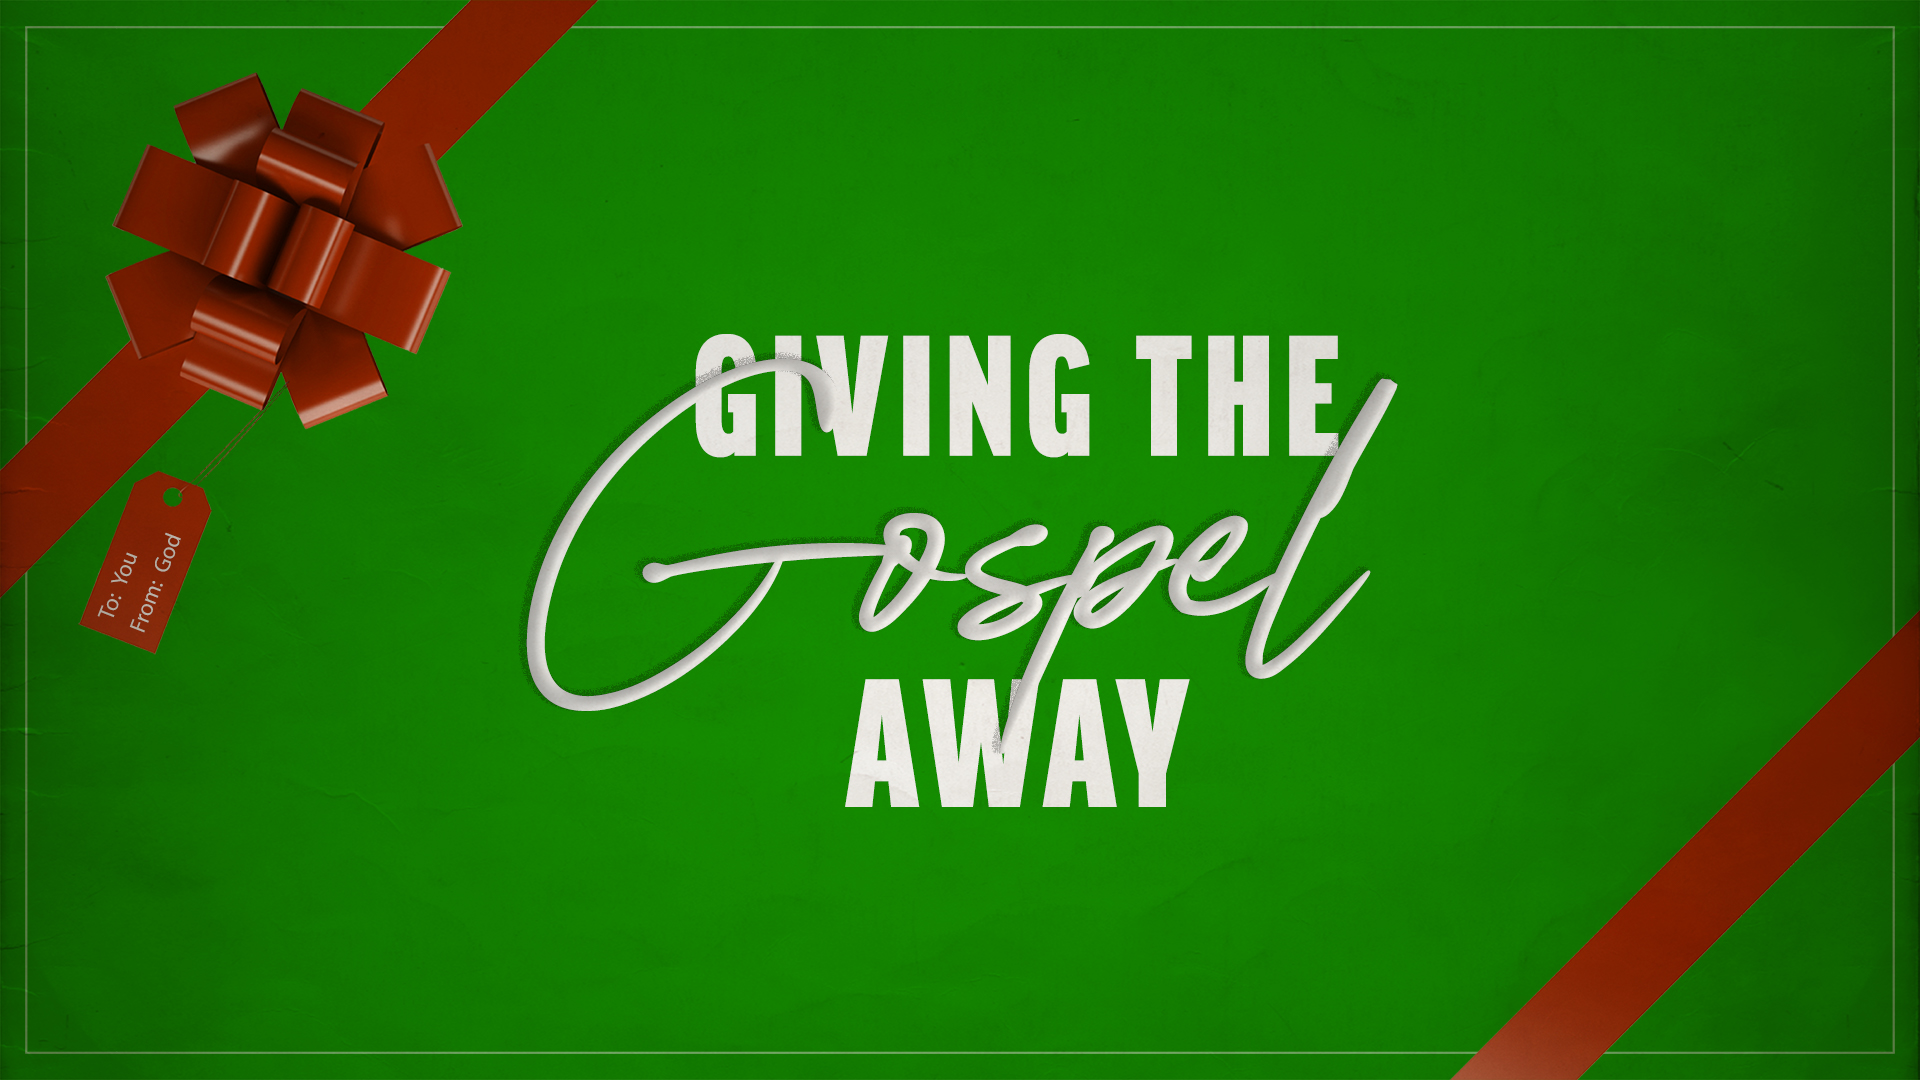 Give the Gospel Away